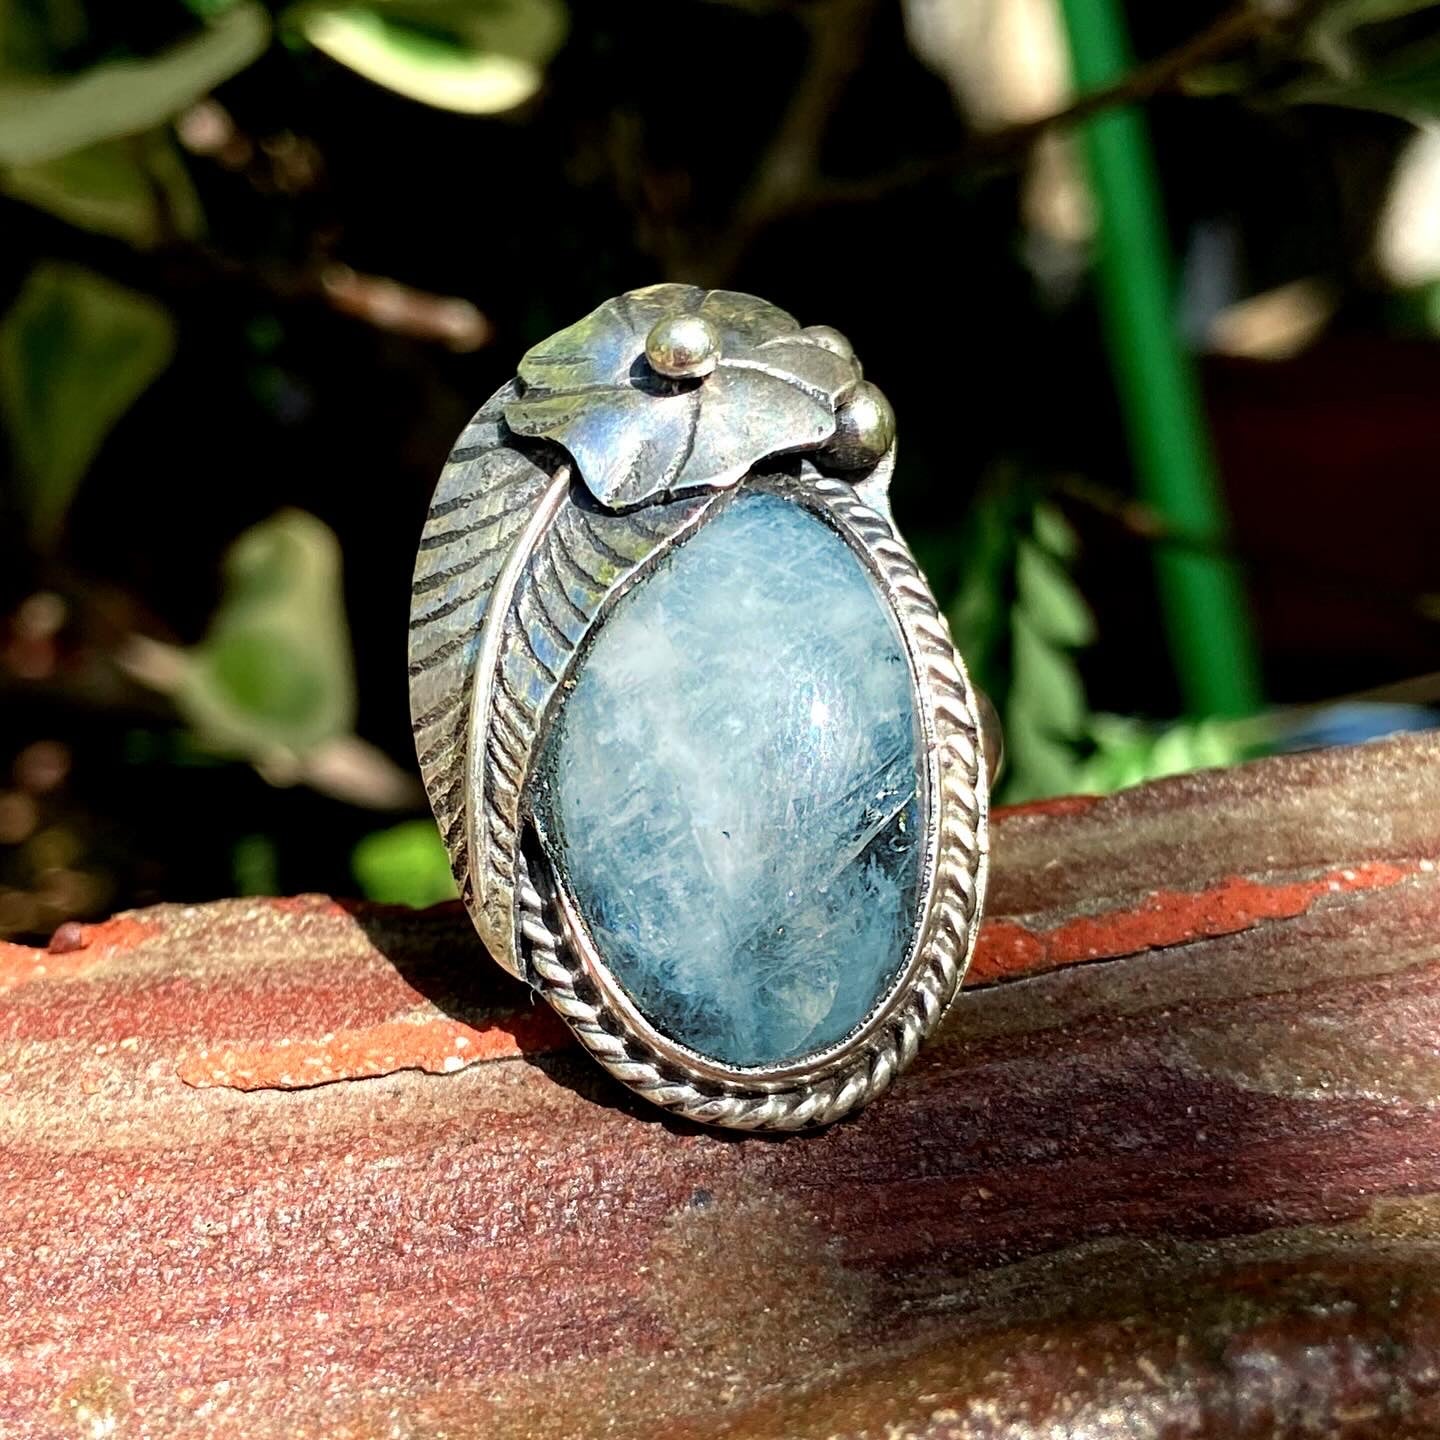 Handmade Sterling Silver925 ring with a rainbow moonstone